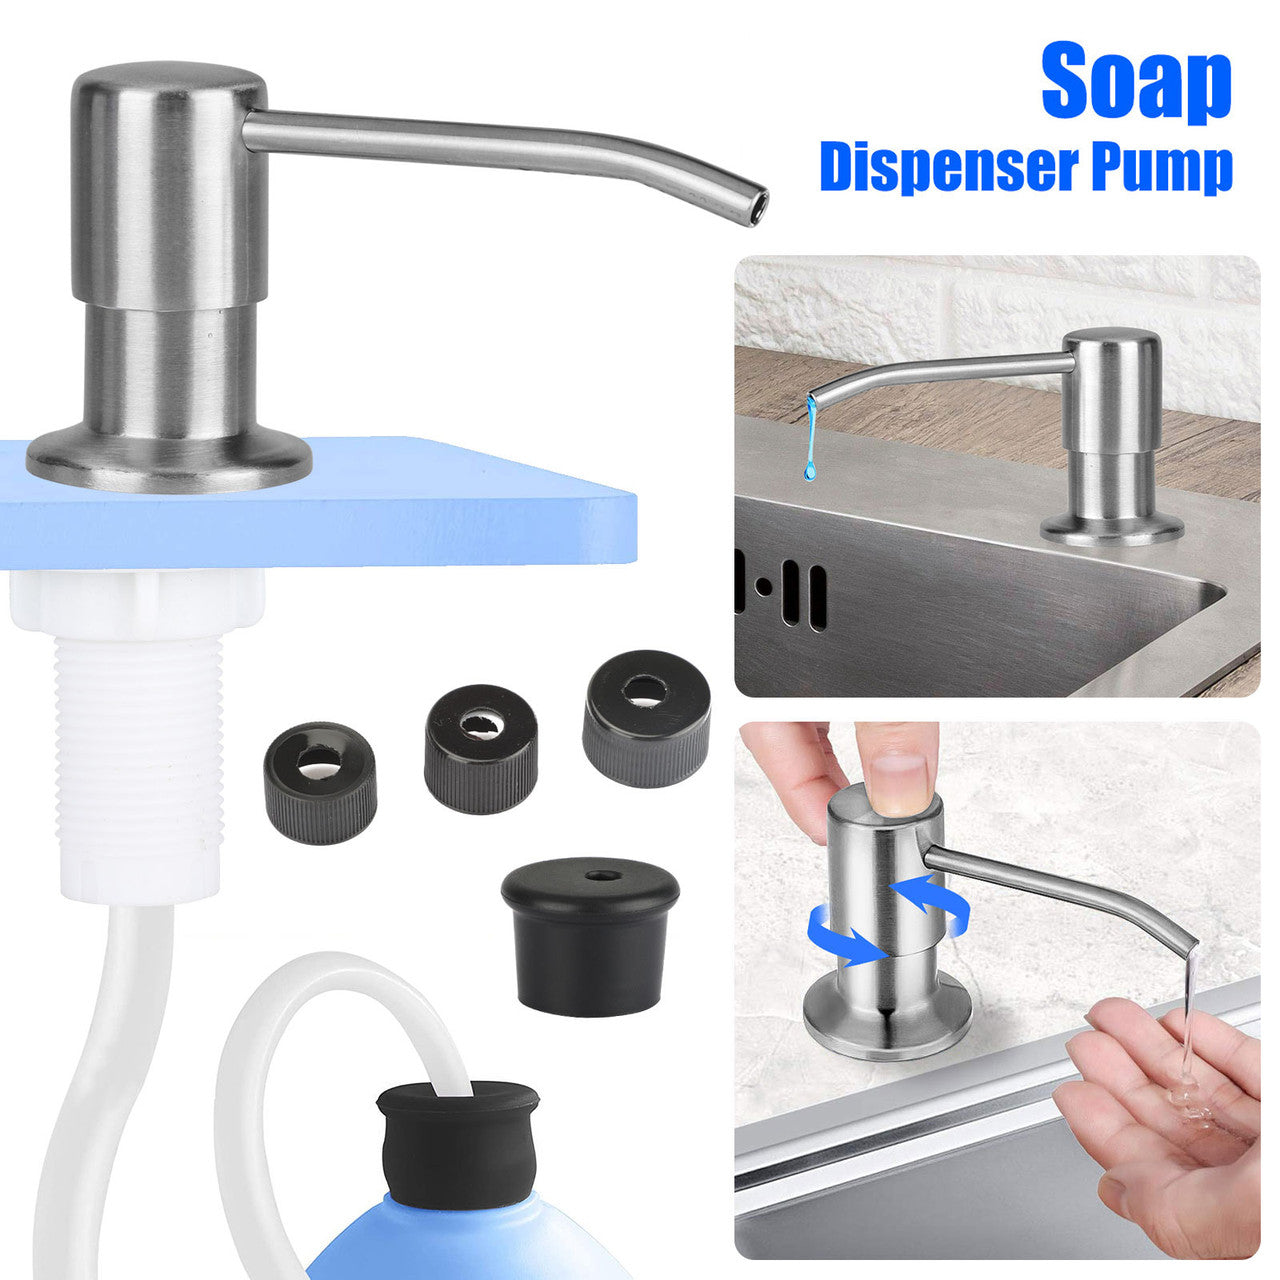 Soap Dispenser Extension 47" Tube Kit for Kitchen Sink and Tube Kit(Brass Brushed Nickel), Stainless Press Head with Silicone Tube Connects Directly to Soap Bottle, No More Refills